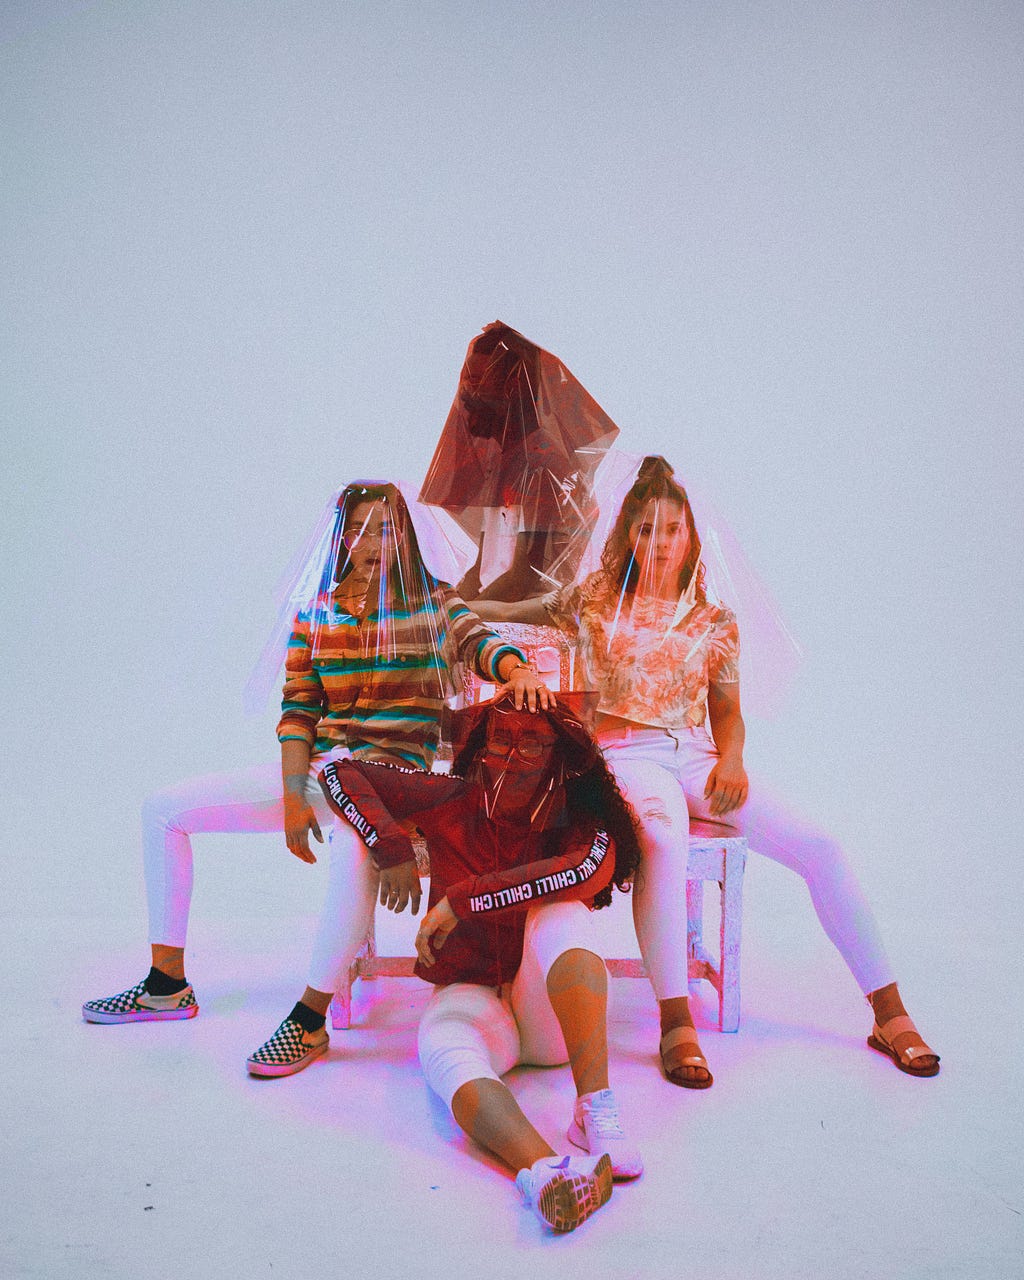 3 women and 1 man with colorful plastic laying over their heads